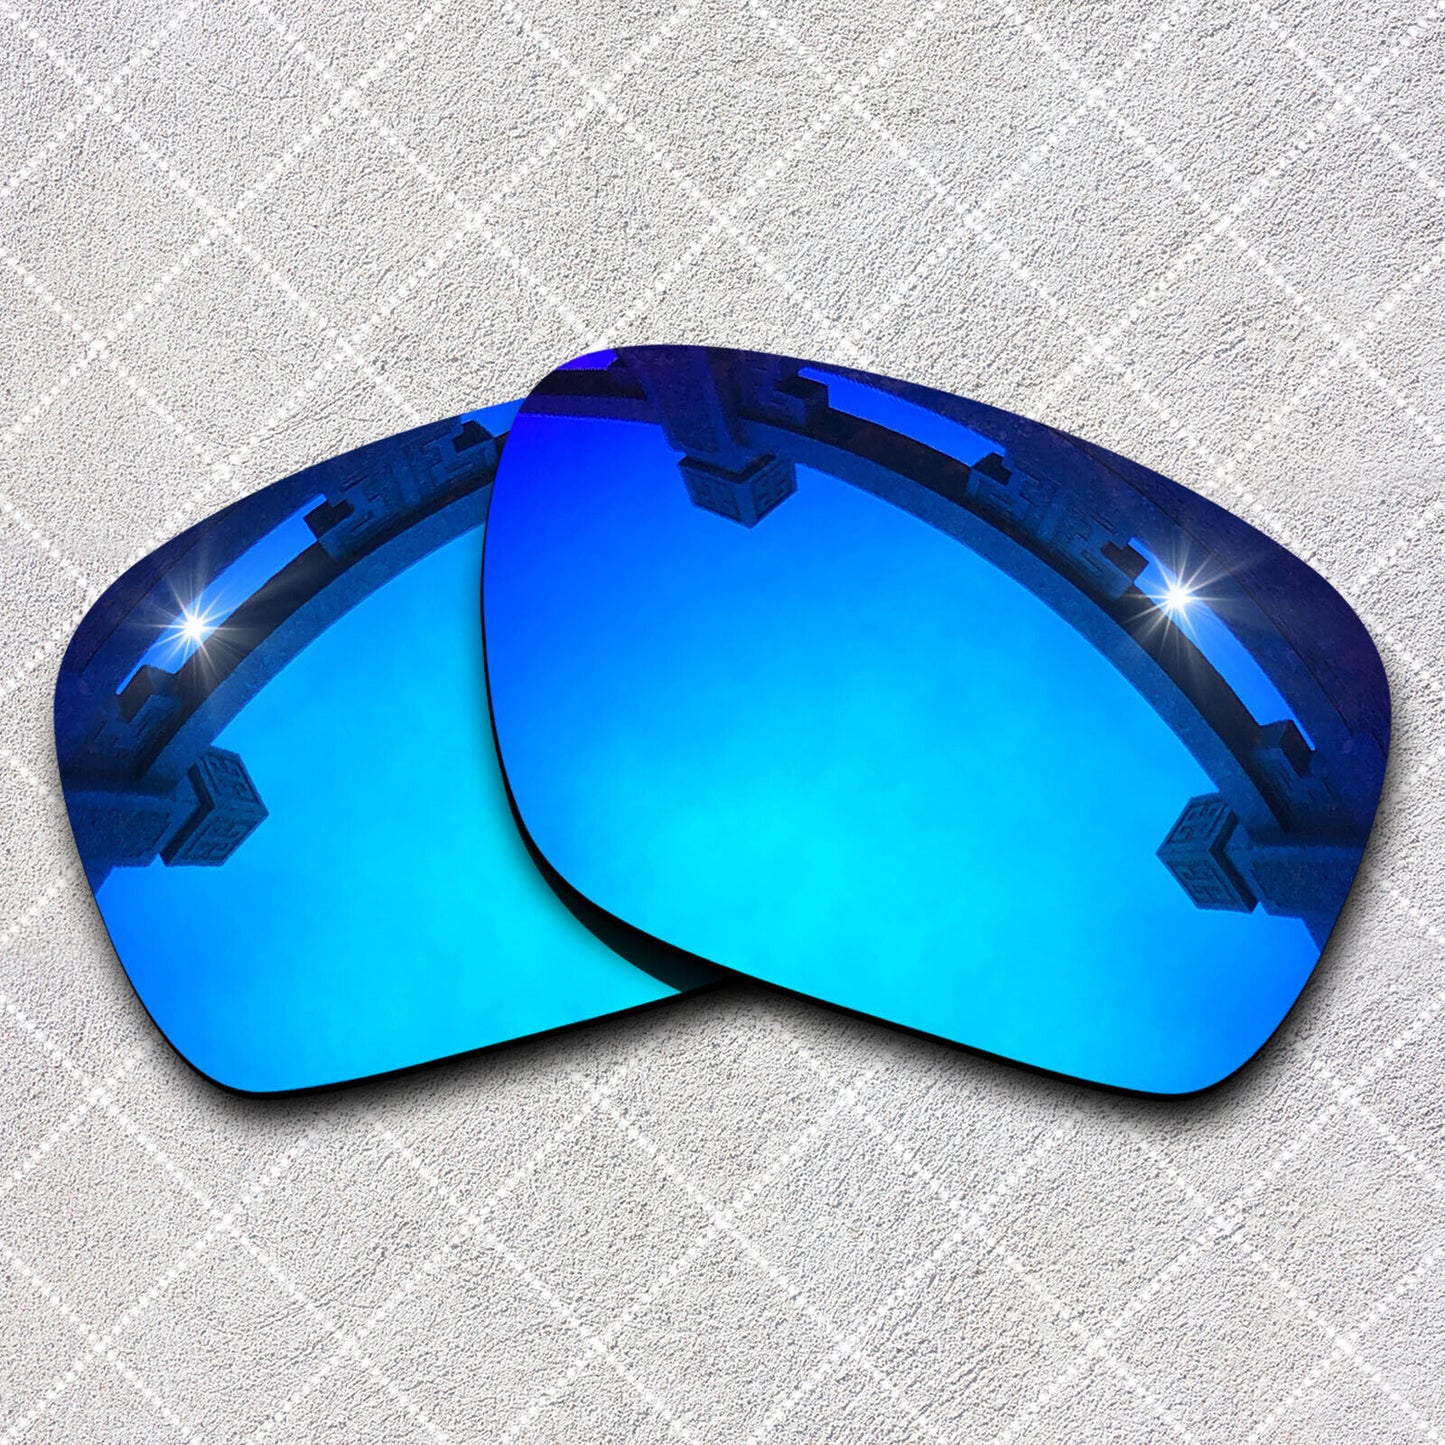 HeyRay Replacement Lenses for Mercenary OO9424 Sunglasses Polarized - Opt